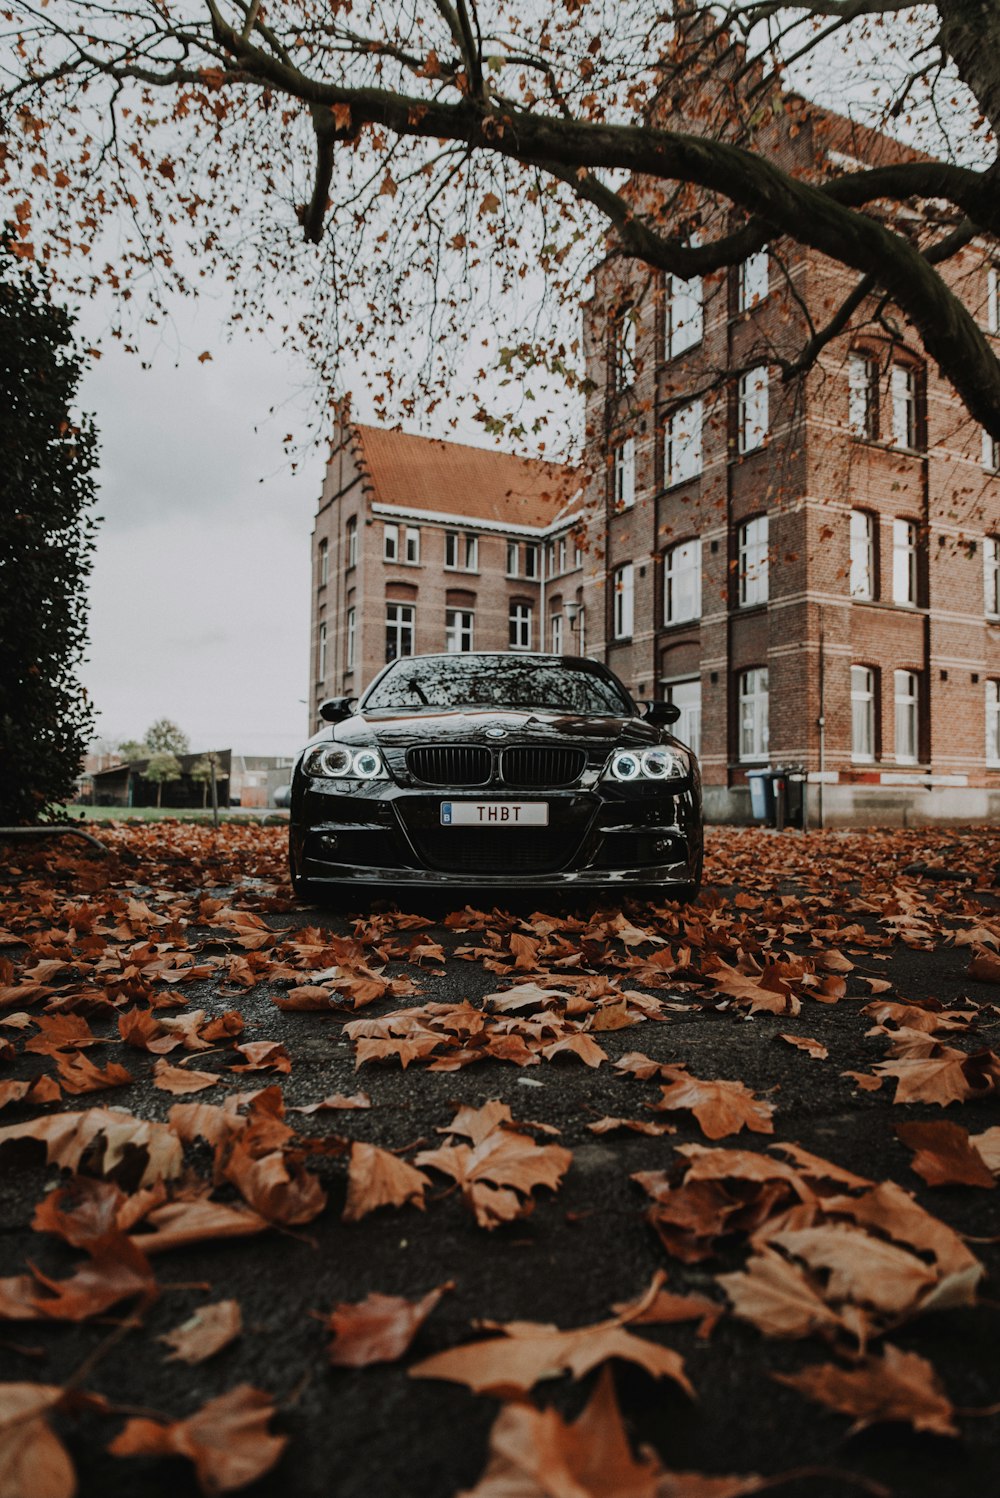 black bmw m 3 parked on brown leaves on ground during daytime